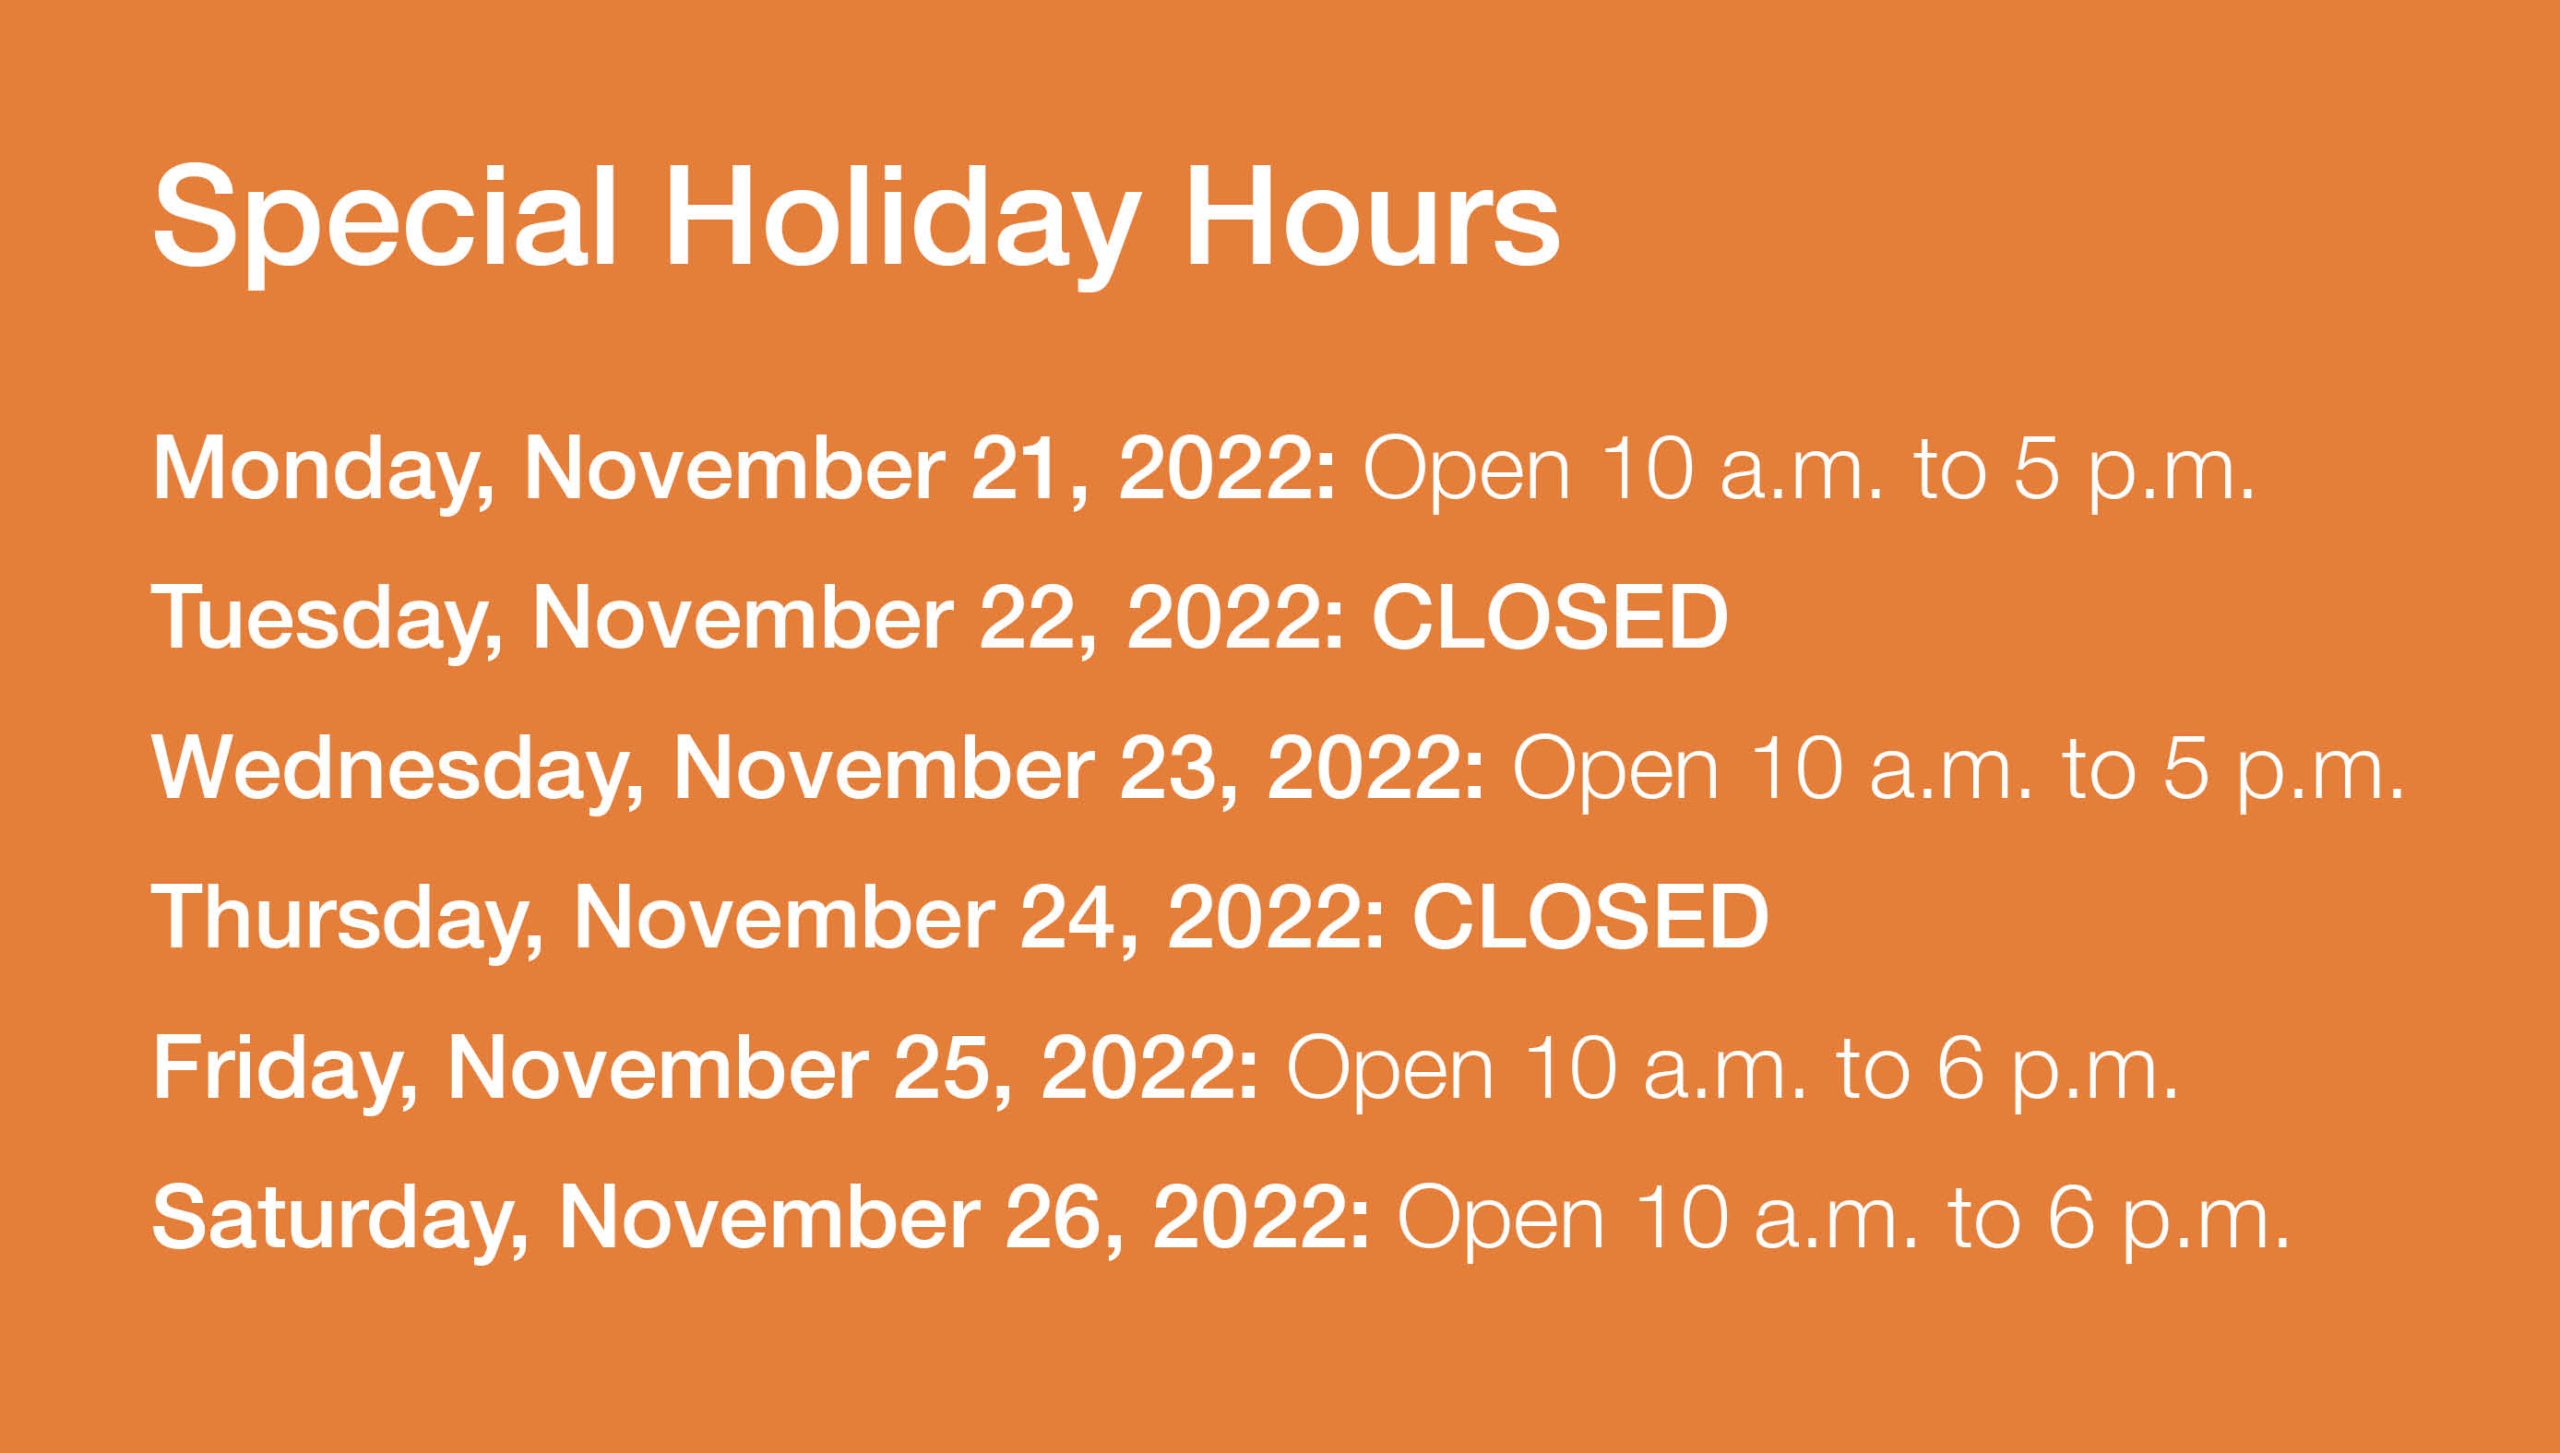 Special Holiday Hours – Monday, November 21, 2022: Open 10 a.m. to 5 p.m. Tuesday, November 22, 2022: CLOSED. Wednesday, November 23, 2022: Open 10 a.m. to 5 p.m. Thursday, November 24, 2022: CLOSED. Friday, November 25, 2022: Open 10 a.m. to 6 p.m. Saturday, November 26, 2022: Open 10 a.m. to 6 p.m. Click for more information.